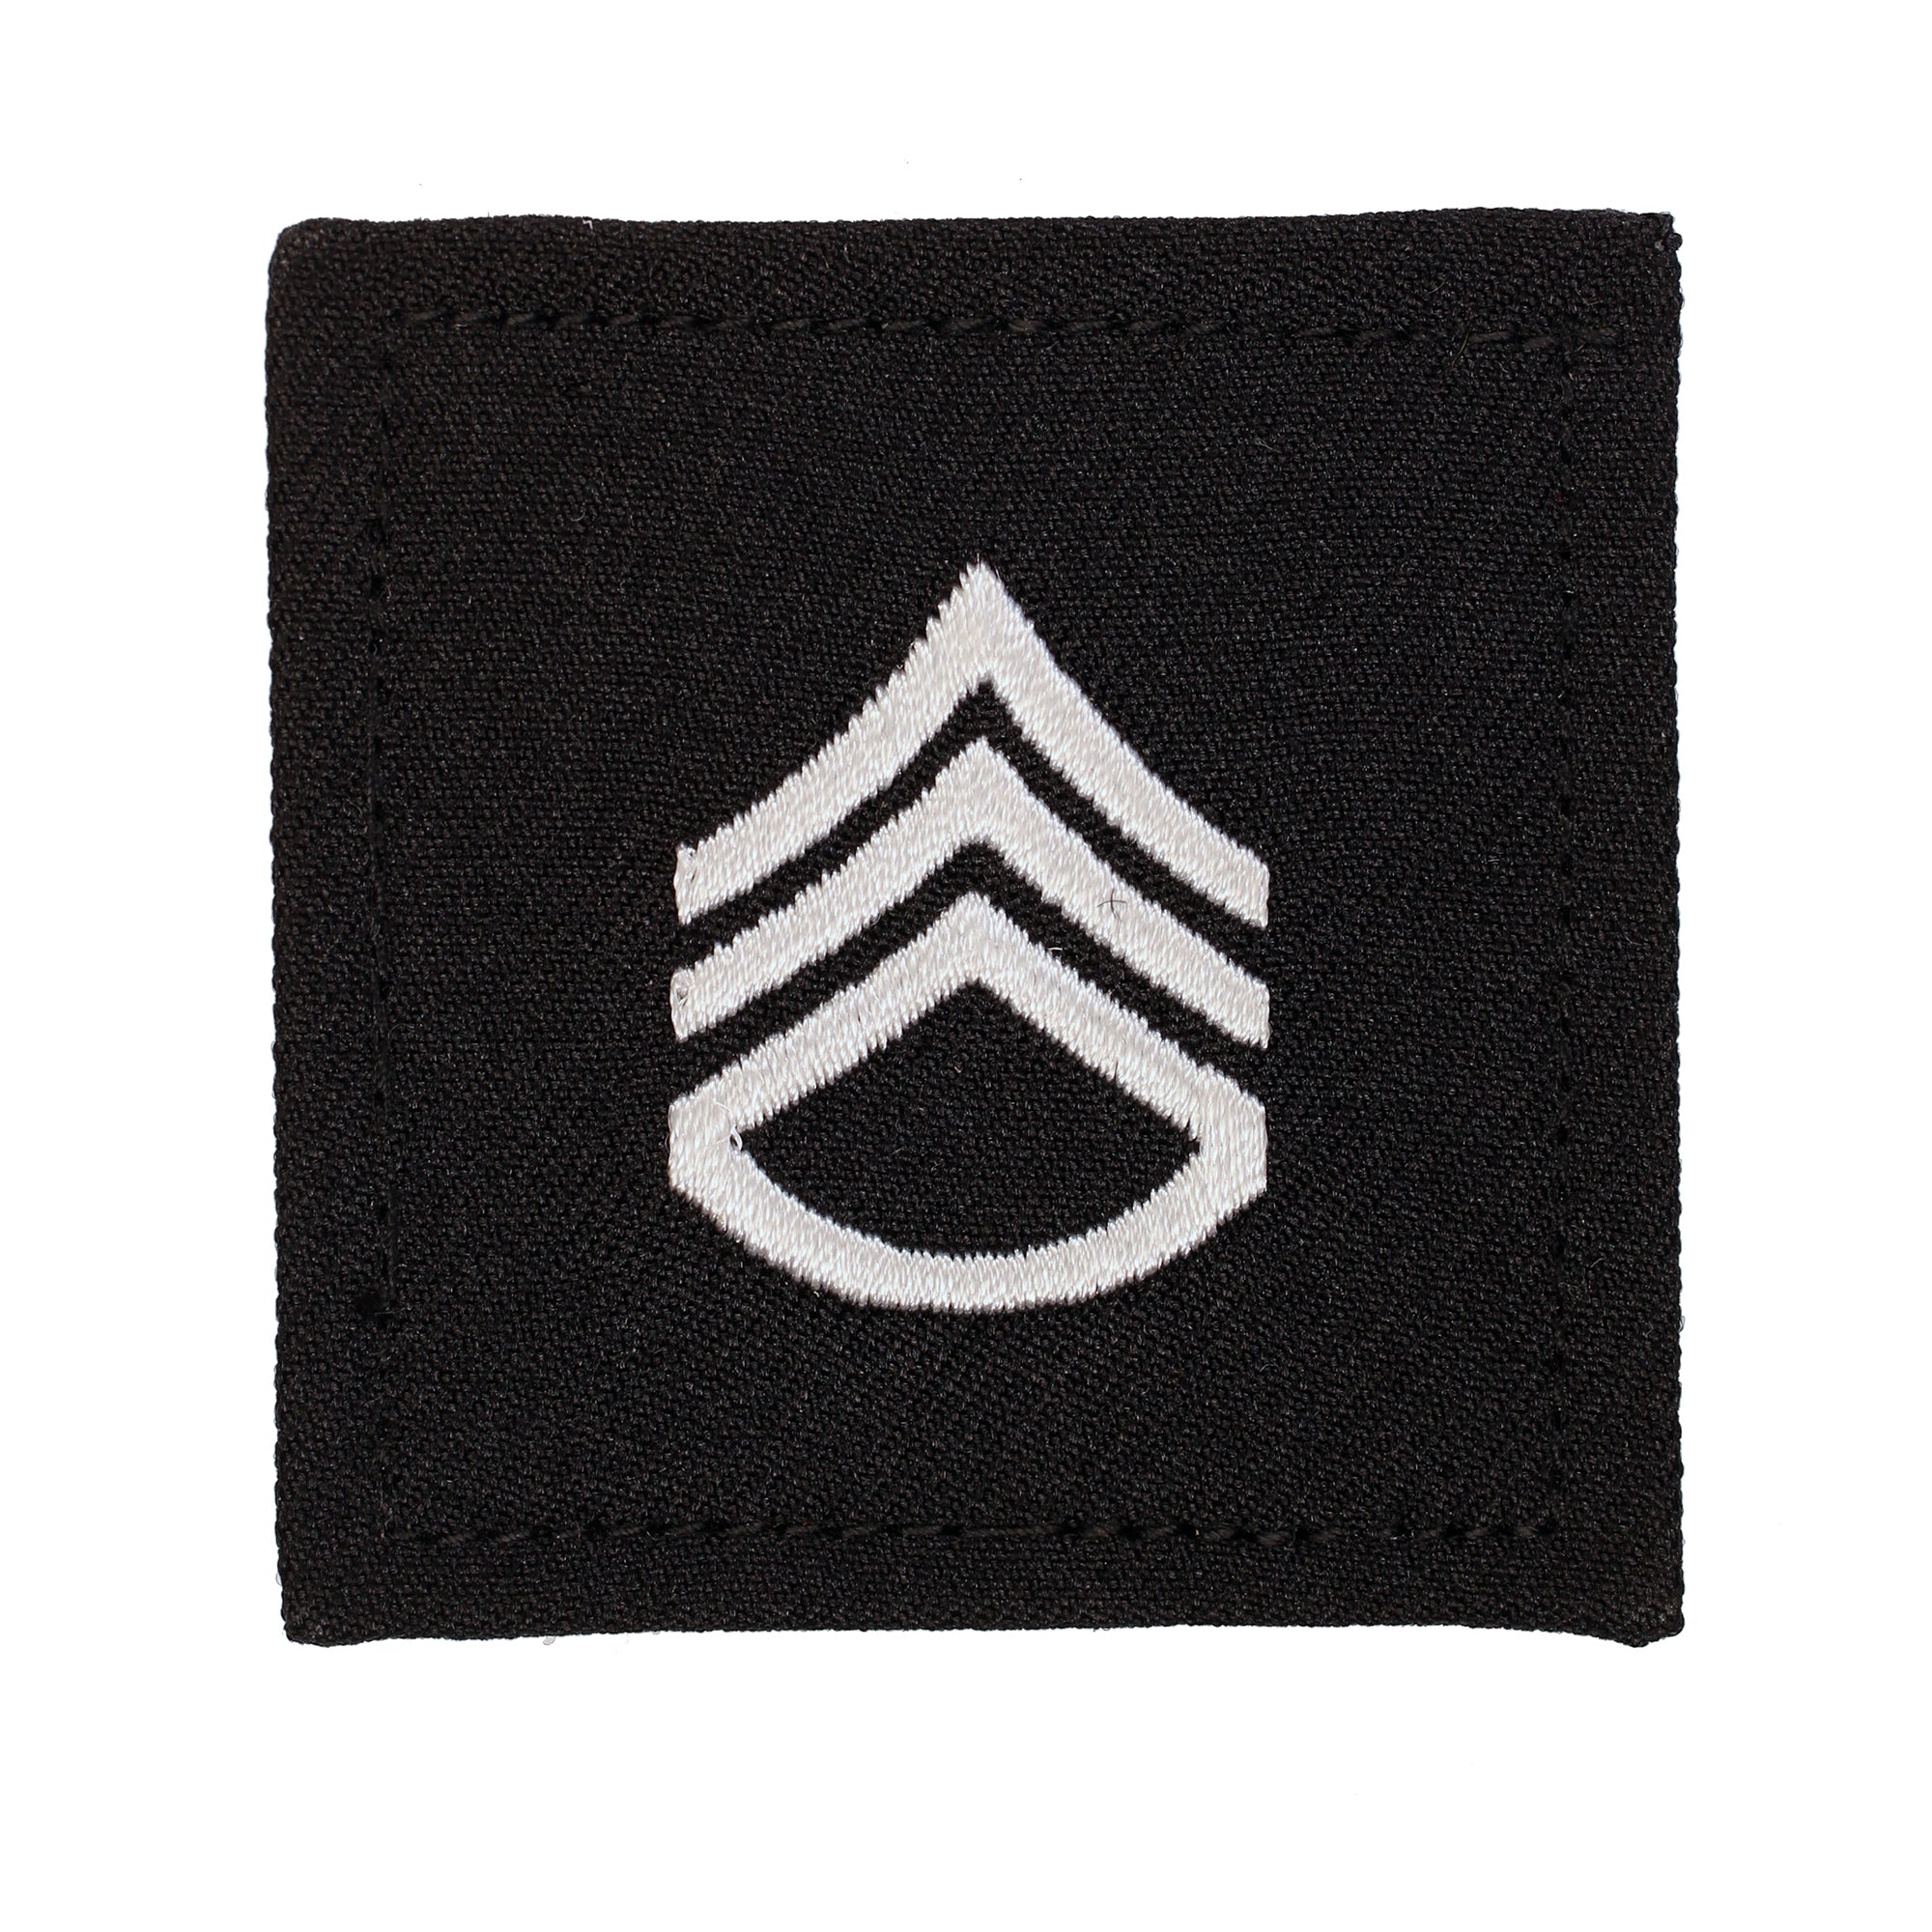 STAFF SERGEANT 2X2 BLACK WITH HOOK FASTNER - Insignia Depot